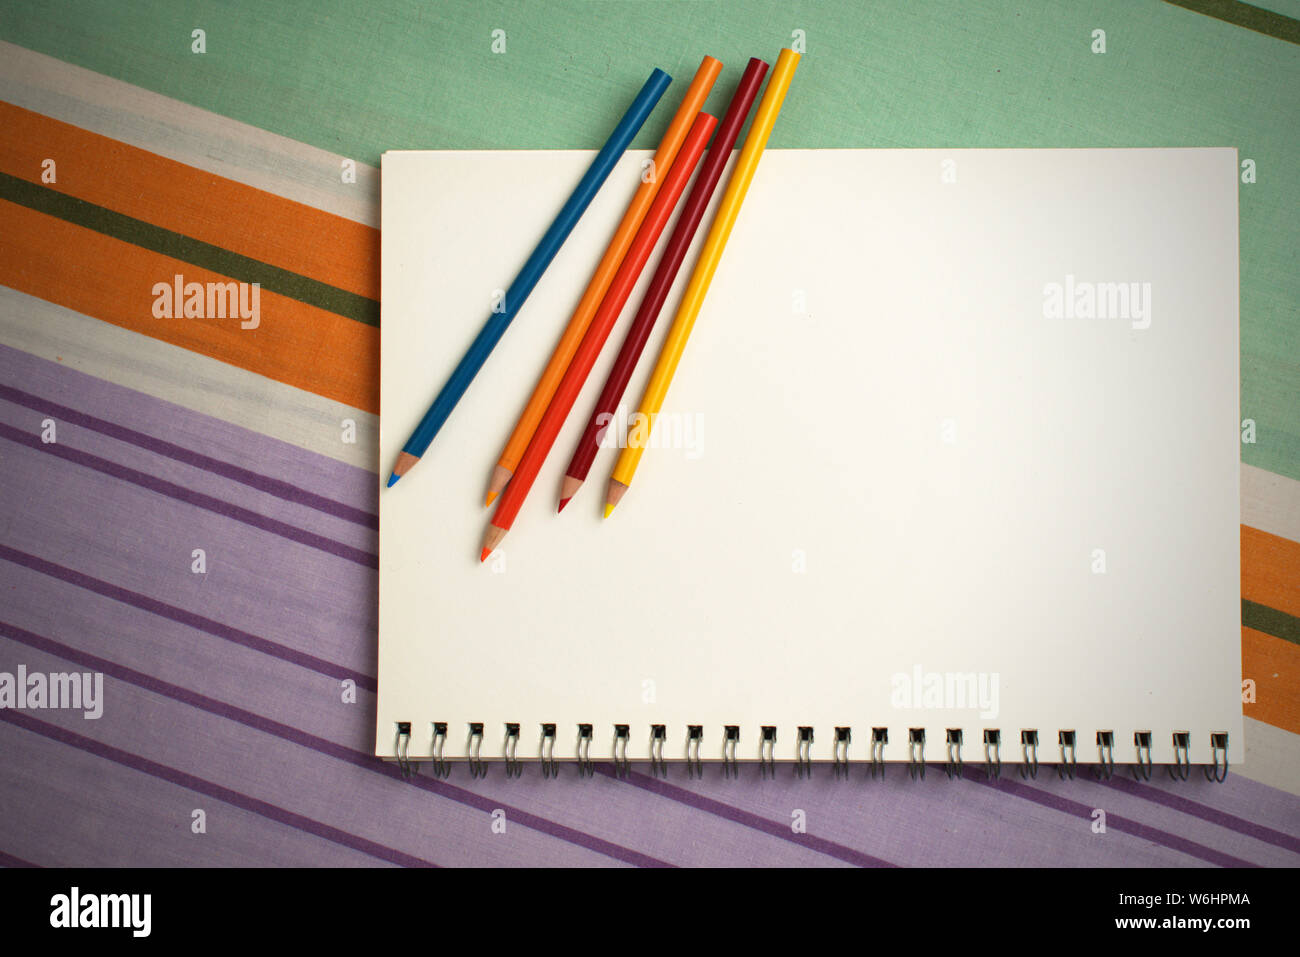 https://c8.alamy.com/comp/W6HPMA/spiral-sketch-pad-and-color-pencils-template-image-good-copy-space-back-to-school-homework-hand-drawing-artist-concept-W6HPMA.jpg